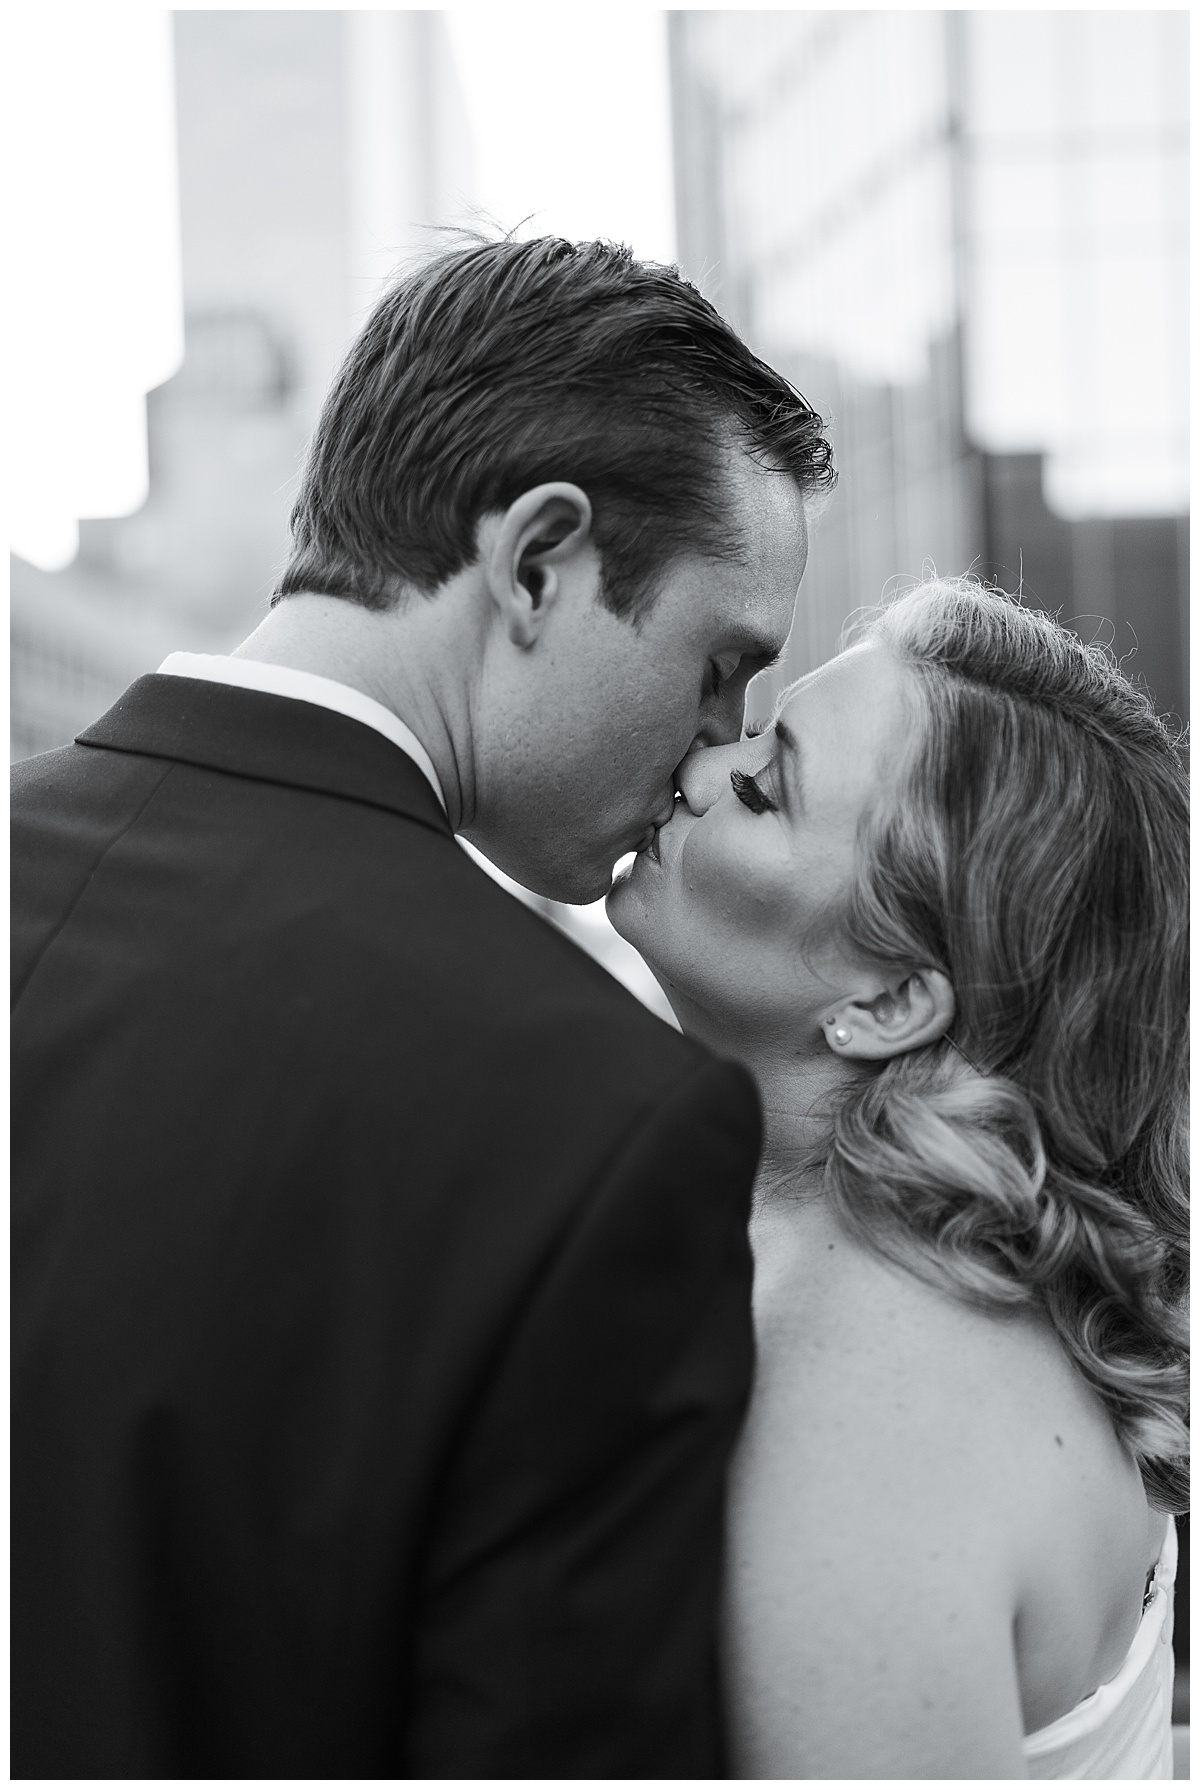 Man and woman exchange a kiss for their Modern Romantic Engagement Session